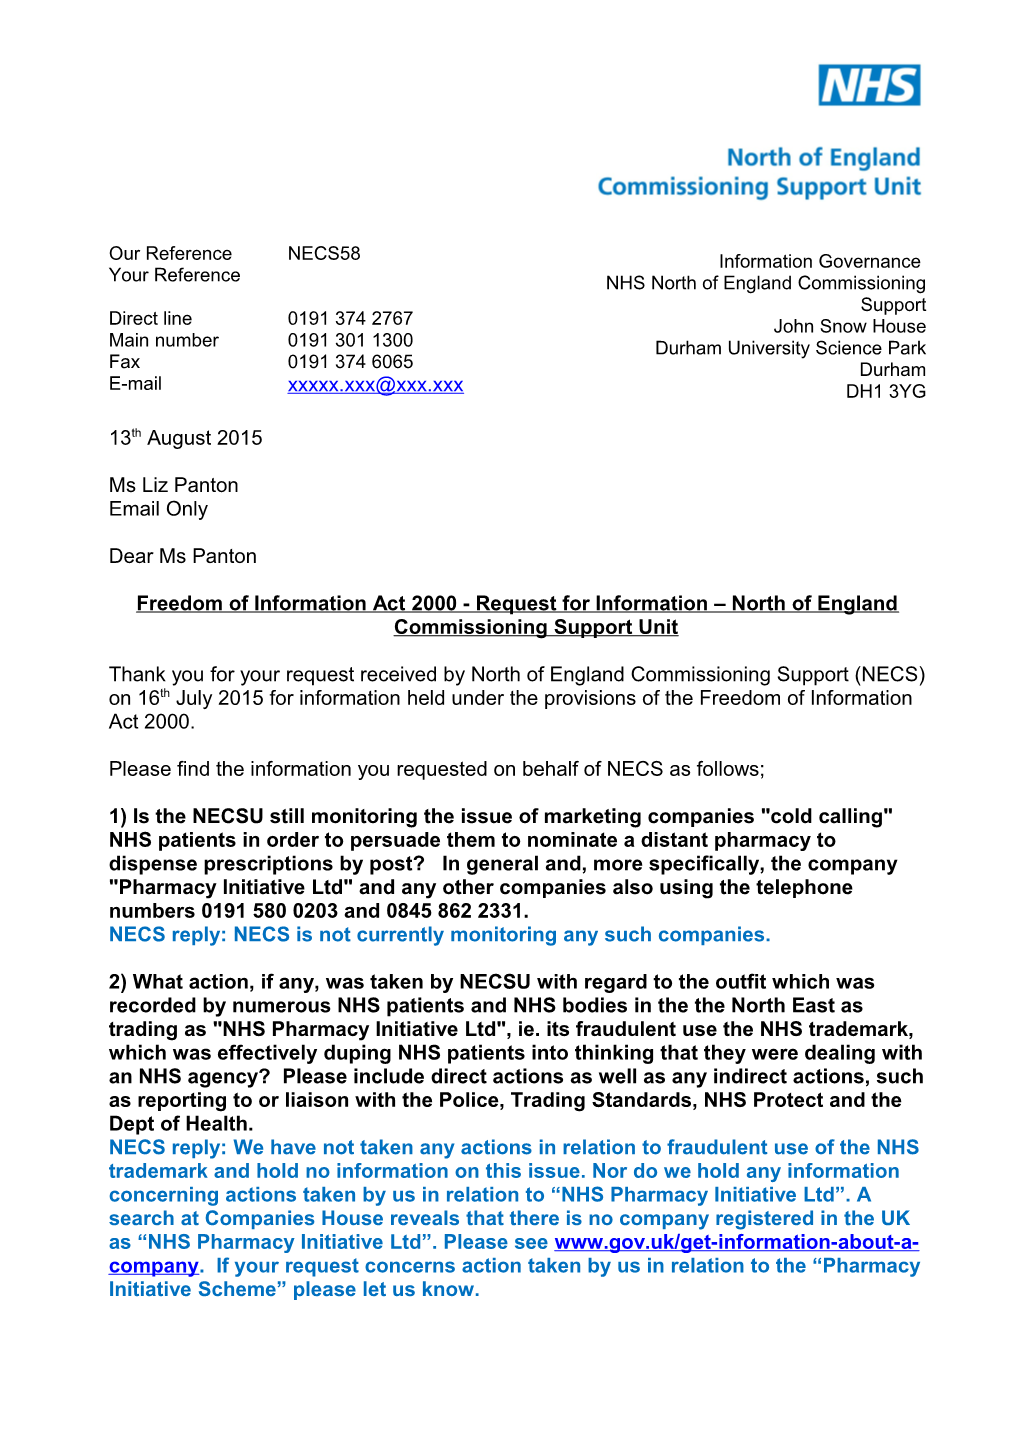 Freedom of Information Act 2000 - Request for Information North of England Commissioning